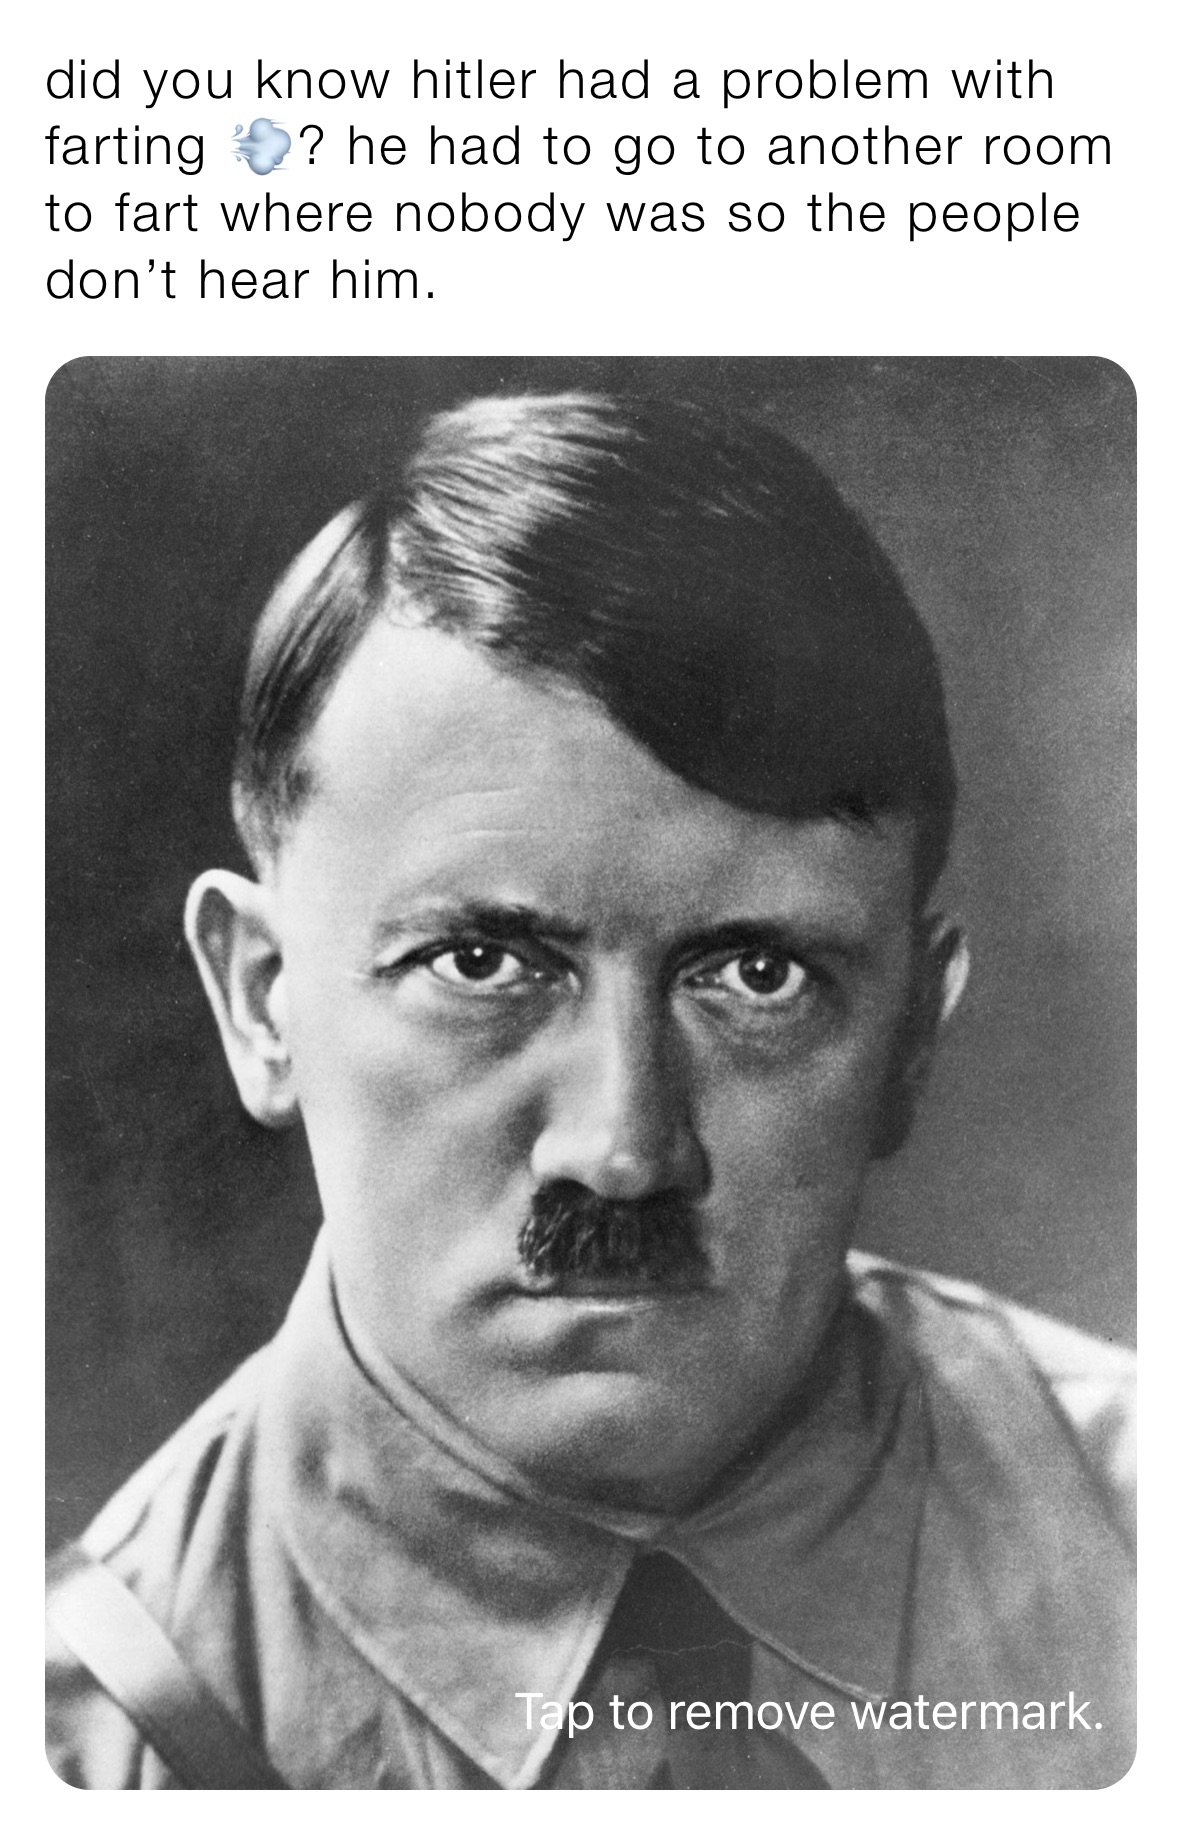 did you know hitler had a problem with farting 💨? he had to go to another room to fart where nobody was so the people don’t hear him.